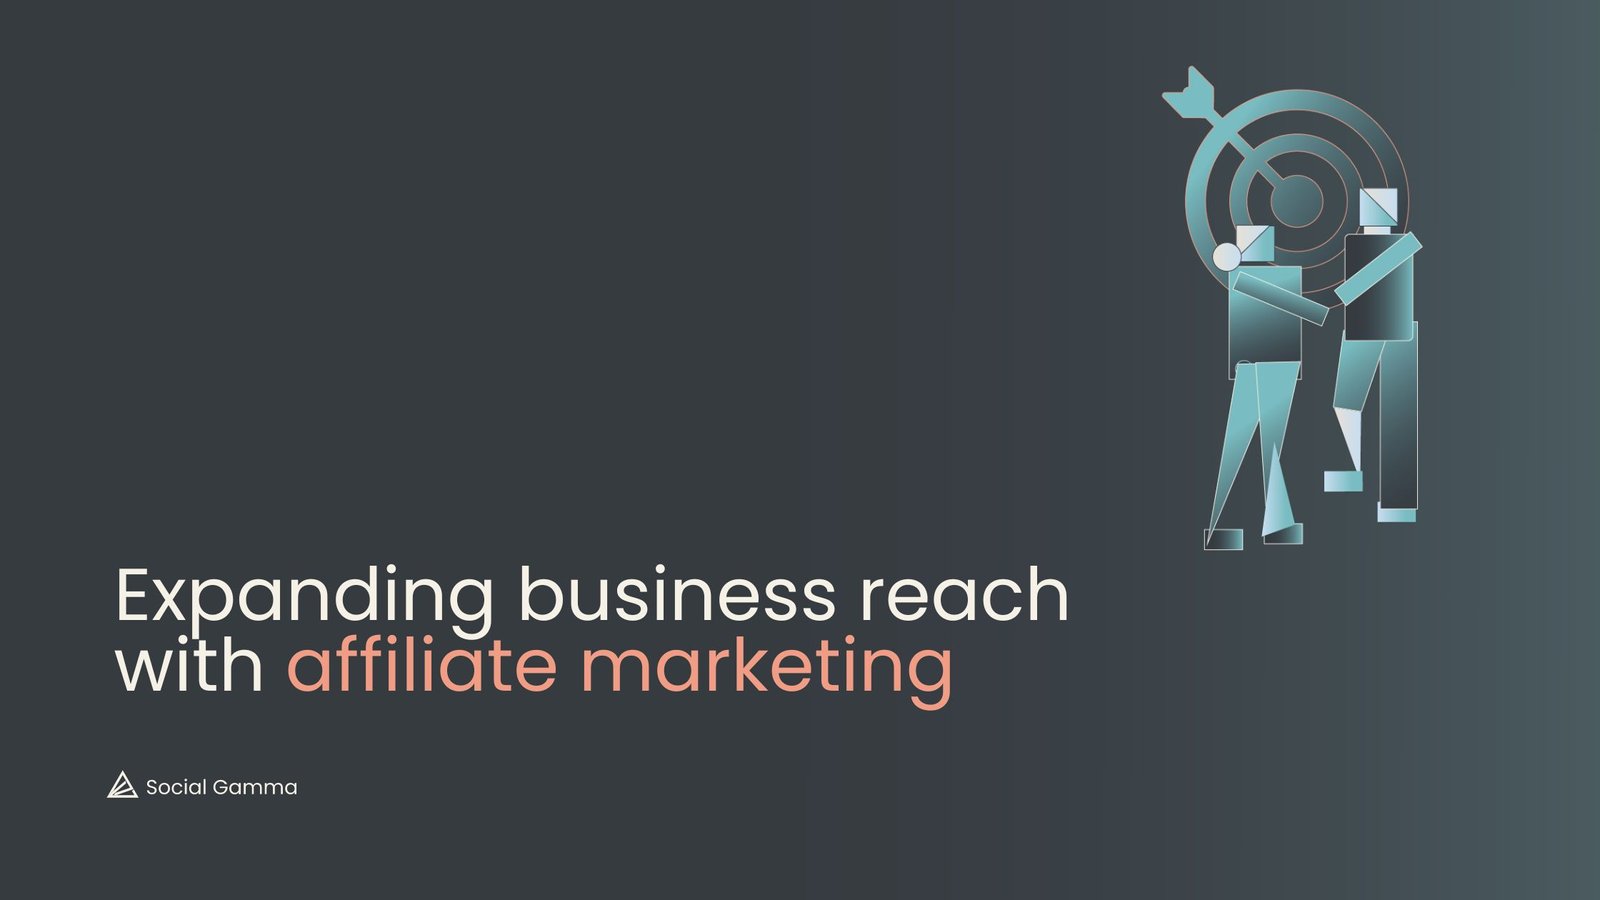 Expanding business reach with affiliate marketing